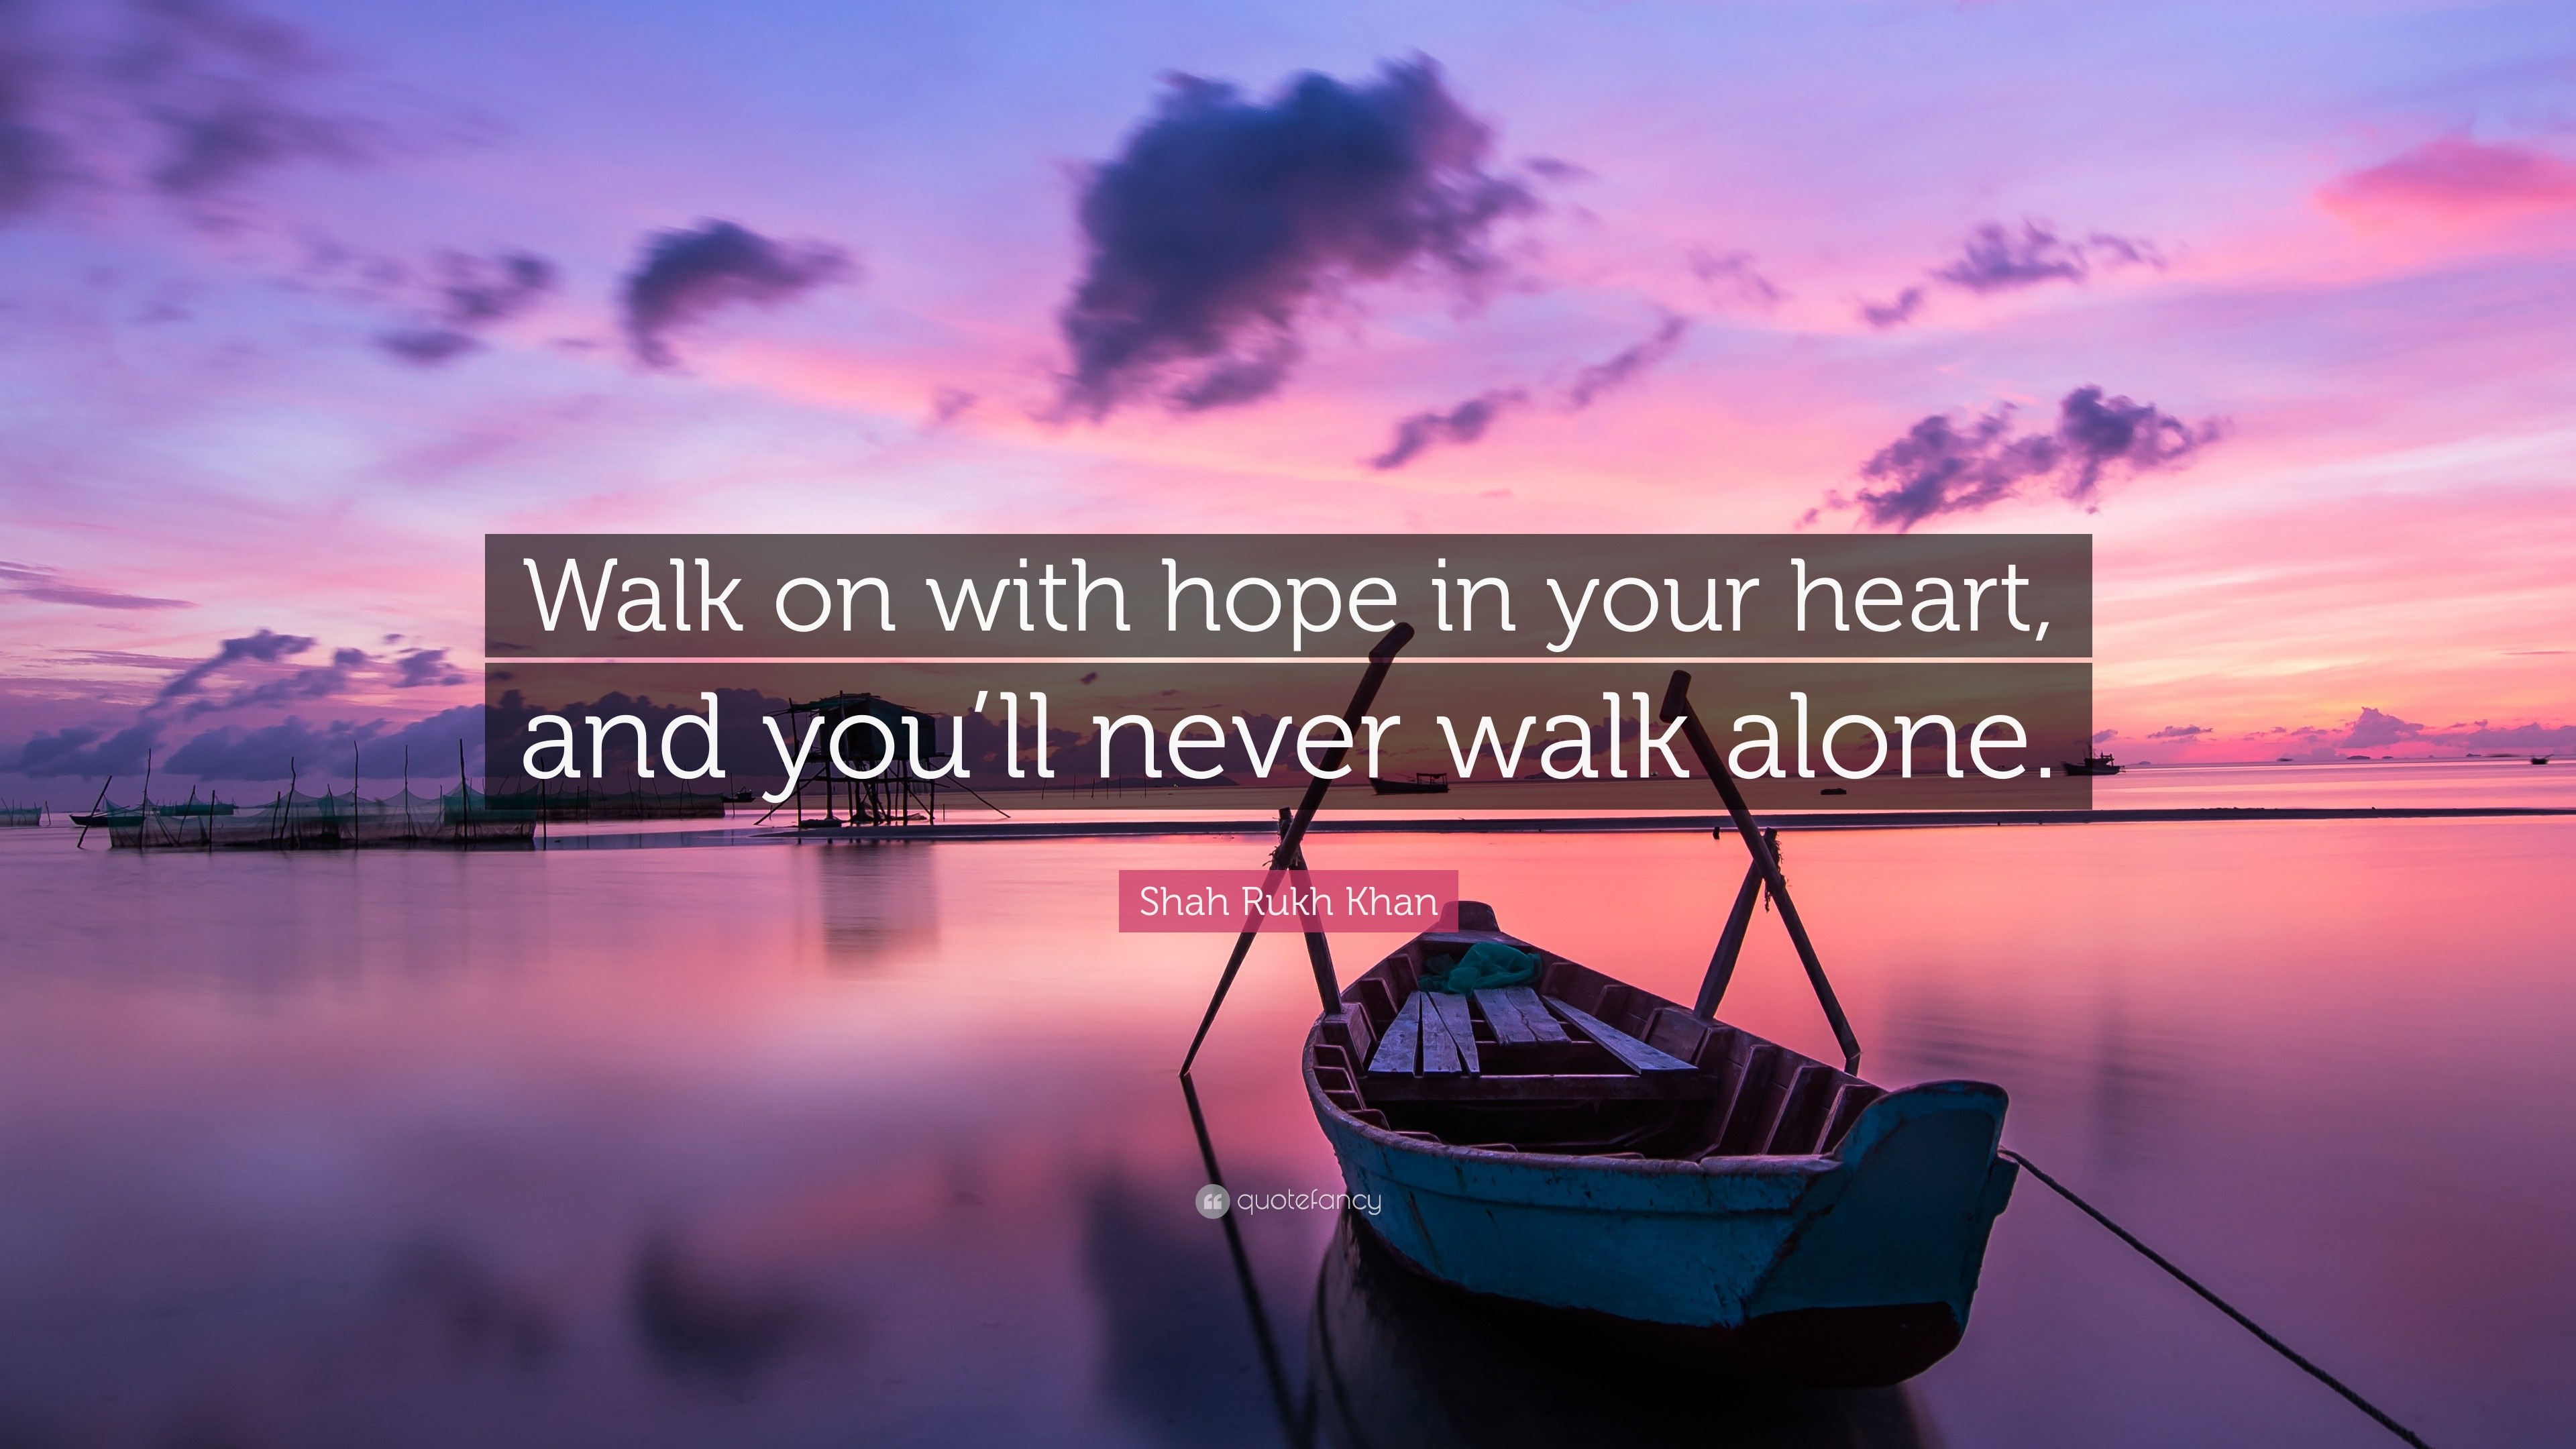 1722965 Shah Rukh Khan Quote Walk on with hope in your heart and you ll